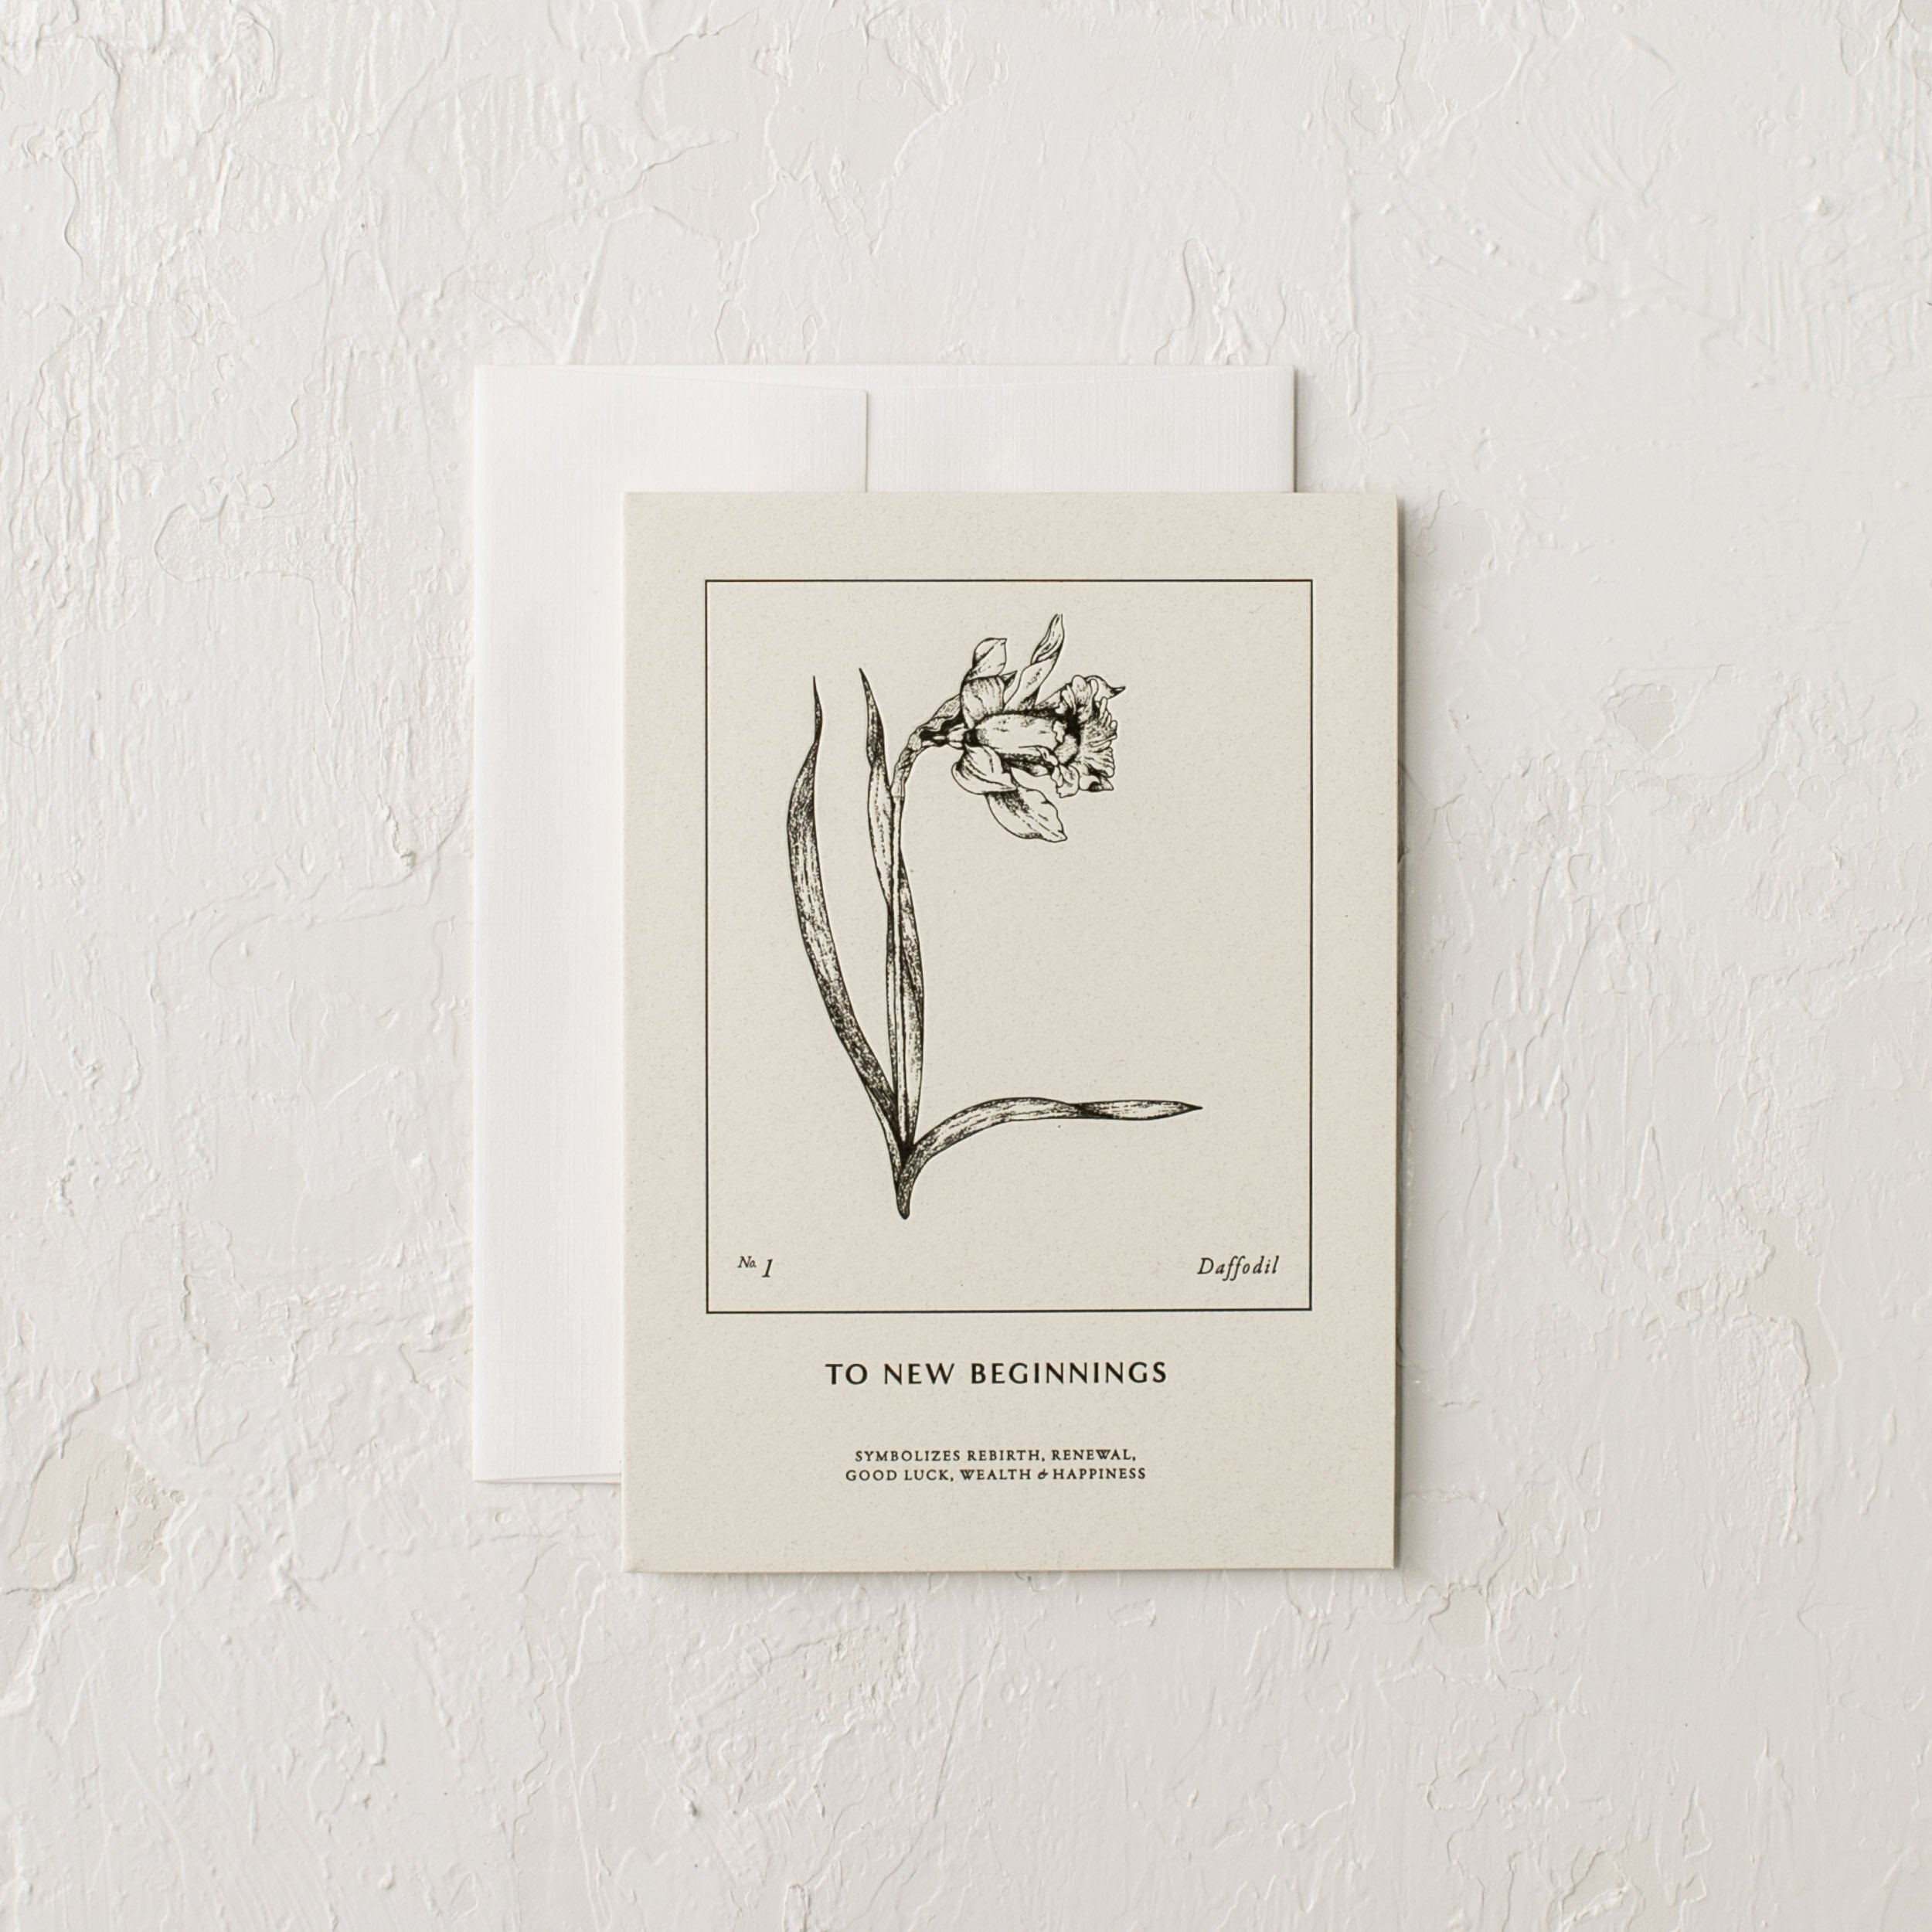 Botanical letter pressed illustration of a Daffodils - To New Beginnings - Symbolizes Rebirth, Renewal, Good Luck, Wealth and Happiness. Designed and sold by Shop Verdant Kansas City Gift Store.